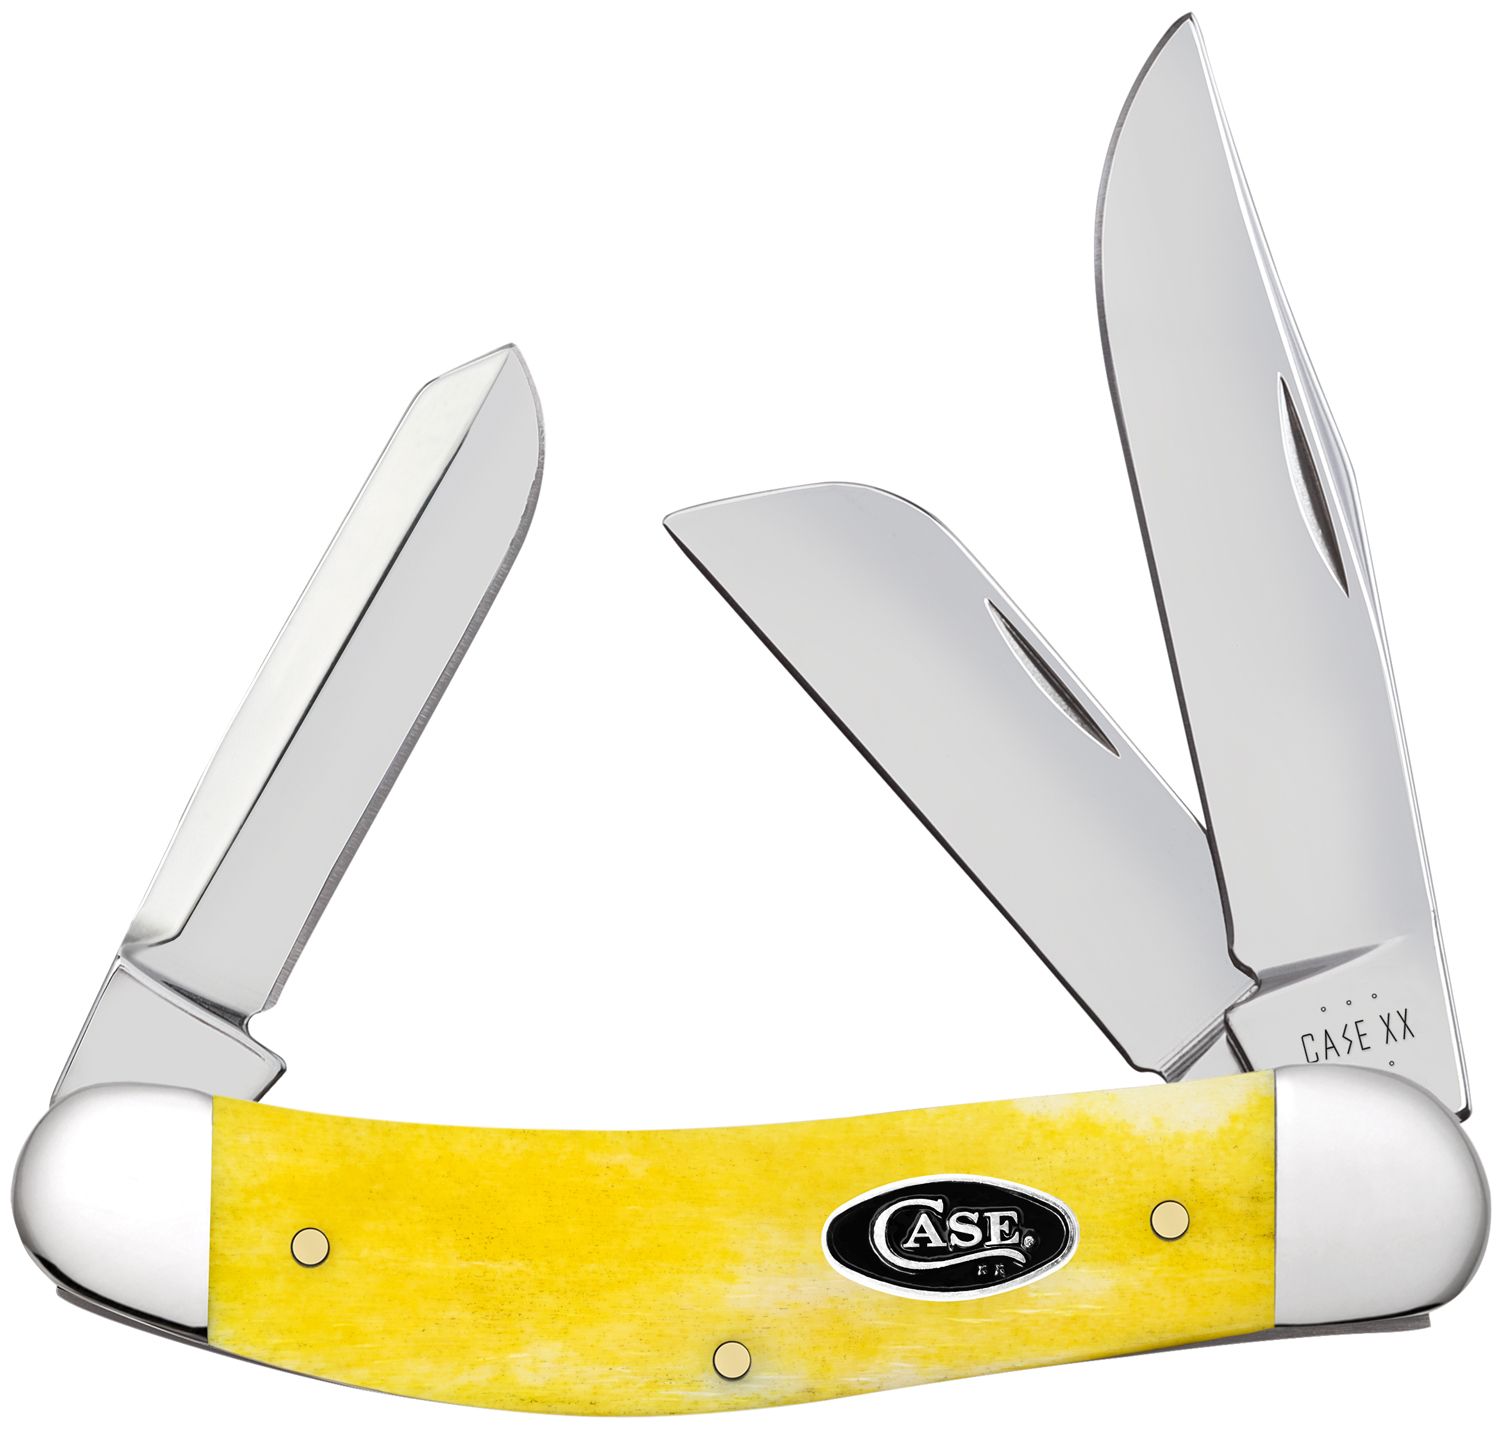 Case Bose Smooth Yellow Bone Sowbelly 3.88 Closed (TB6339 SS) -  KnifeCenter - 20036